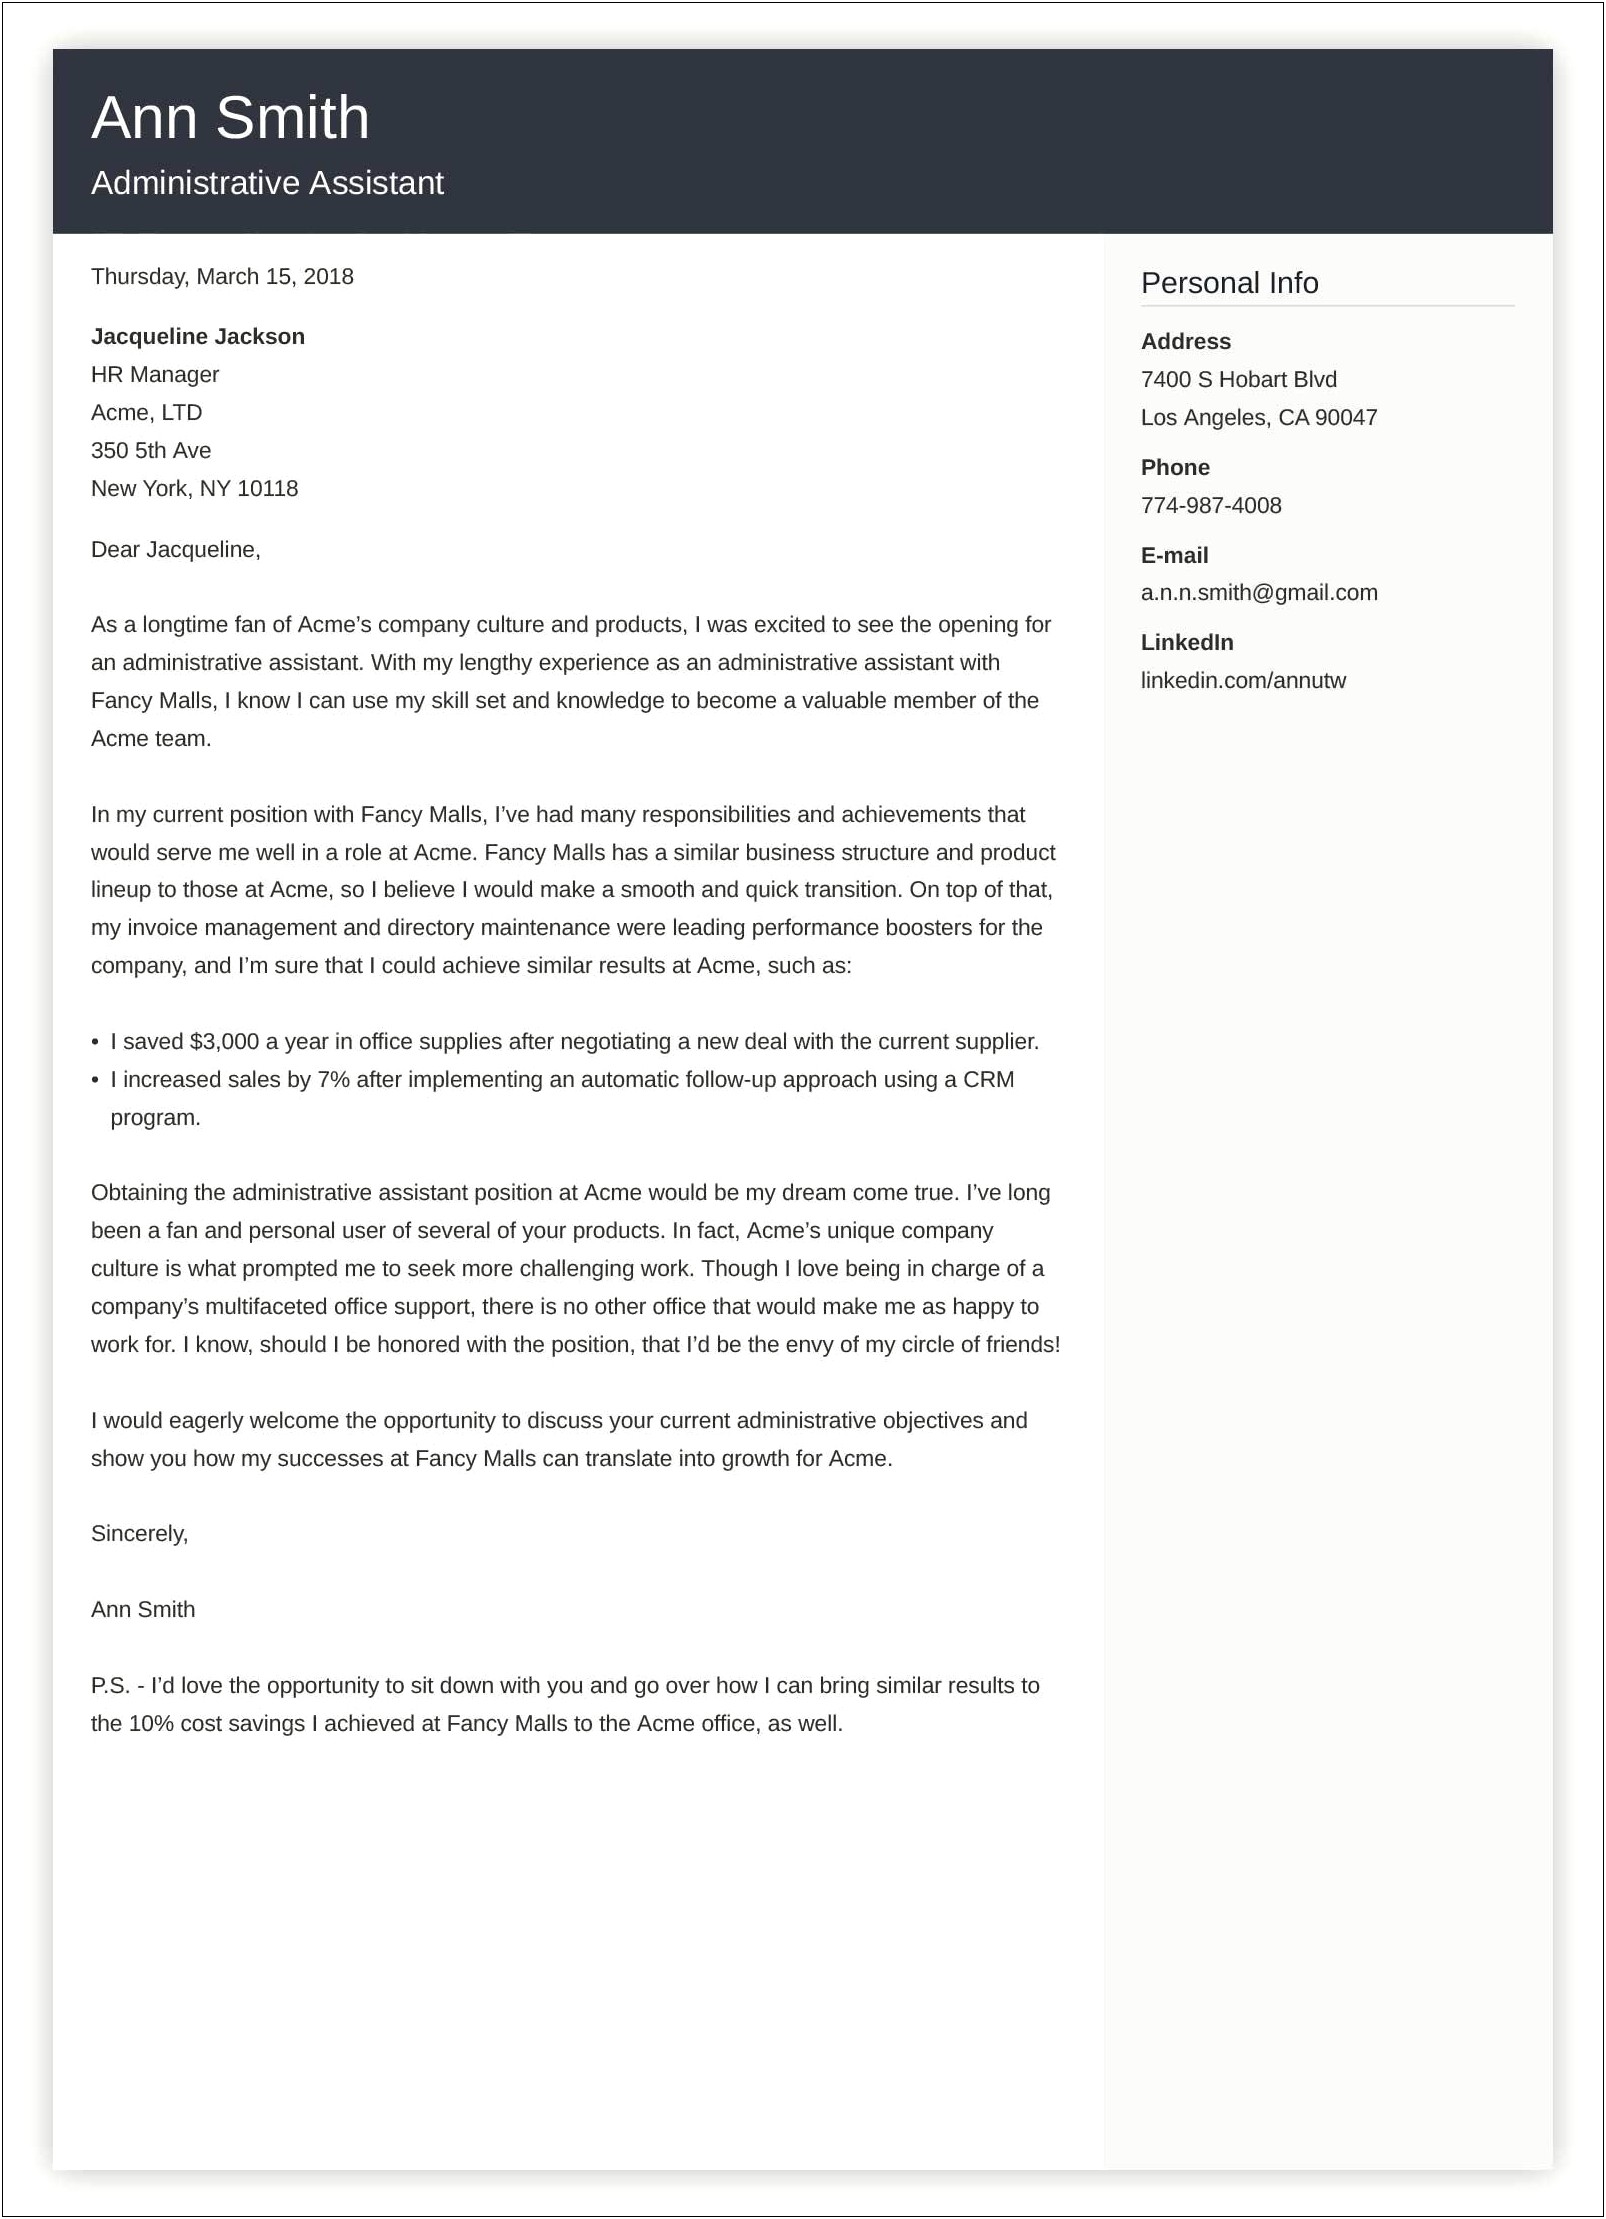 Resume Cover Letter Examples Executive